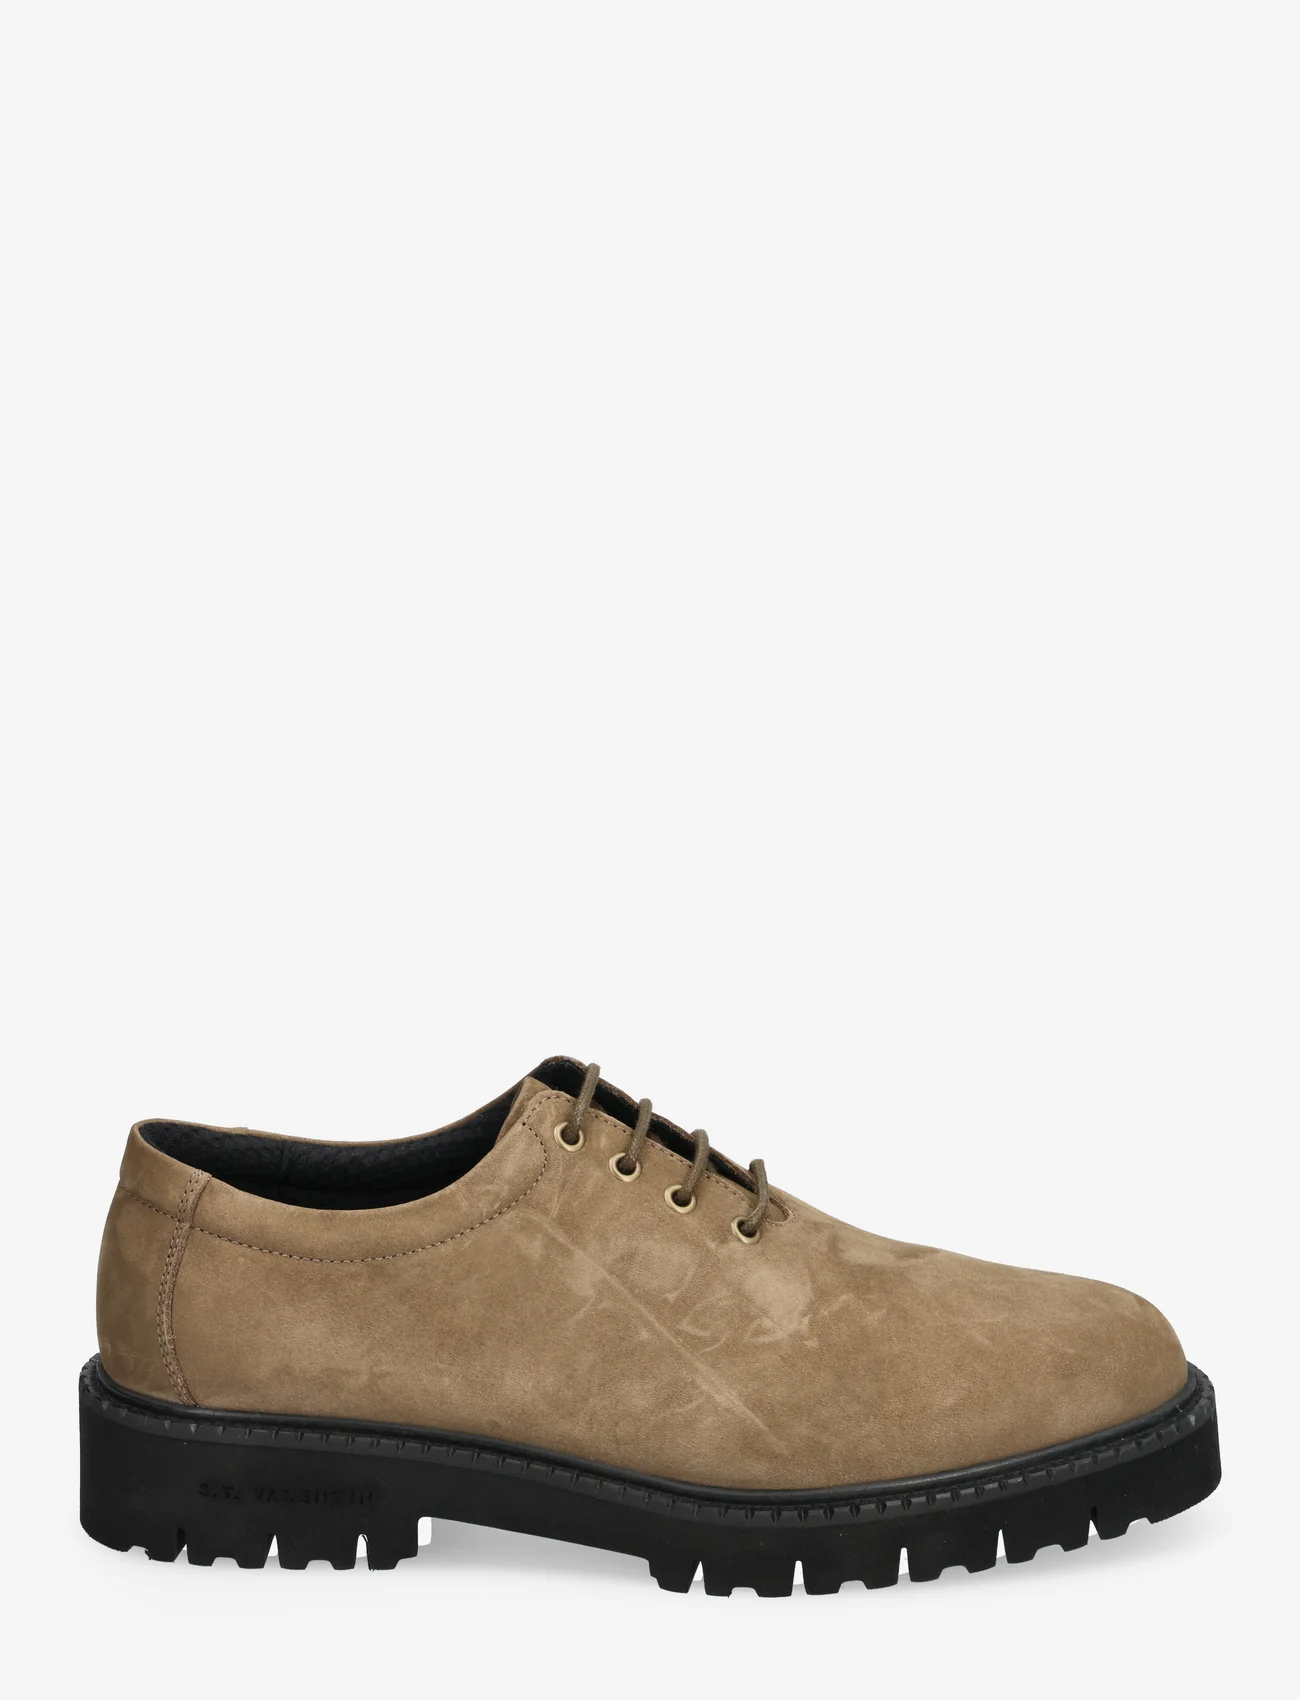 S.T. VALENTIN - Lightweight NSB - Grained leather - laced shoes - taupe - 1